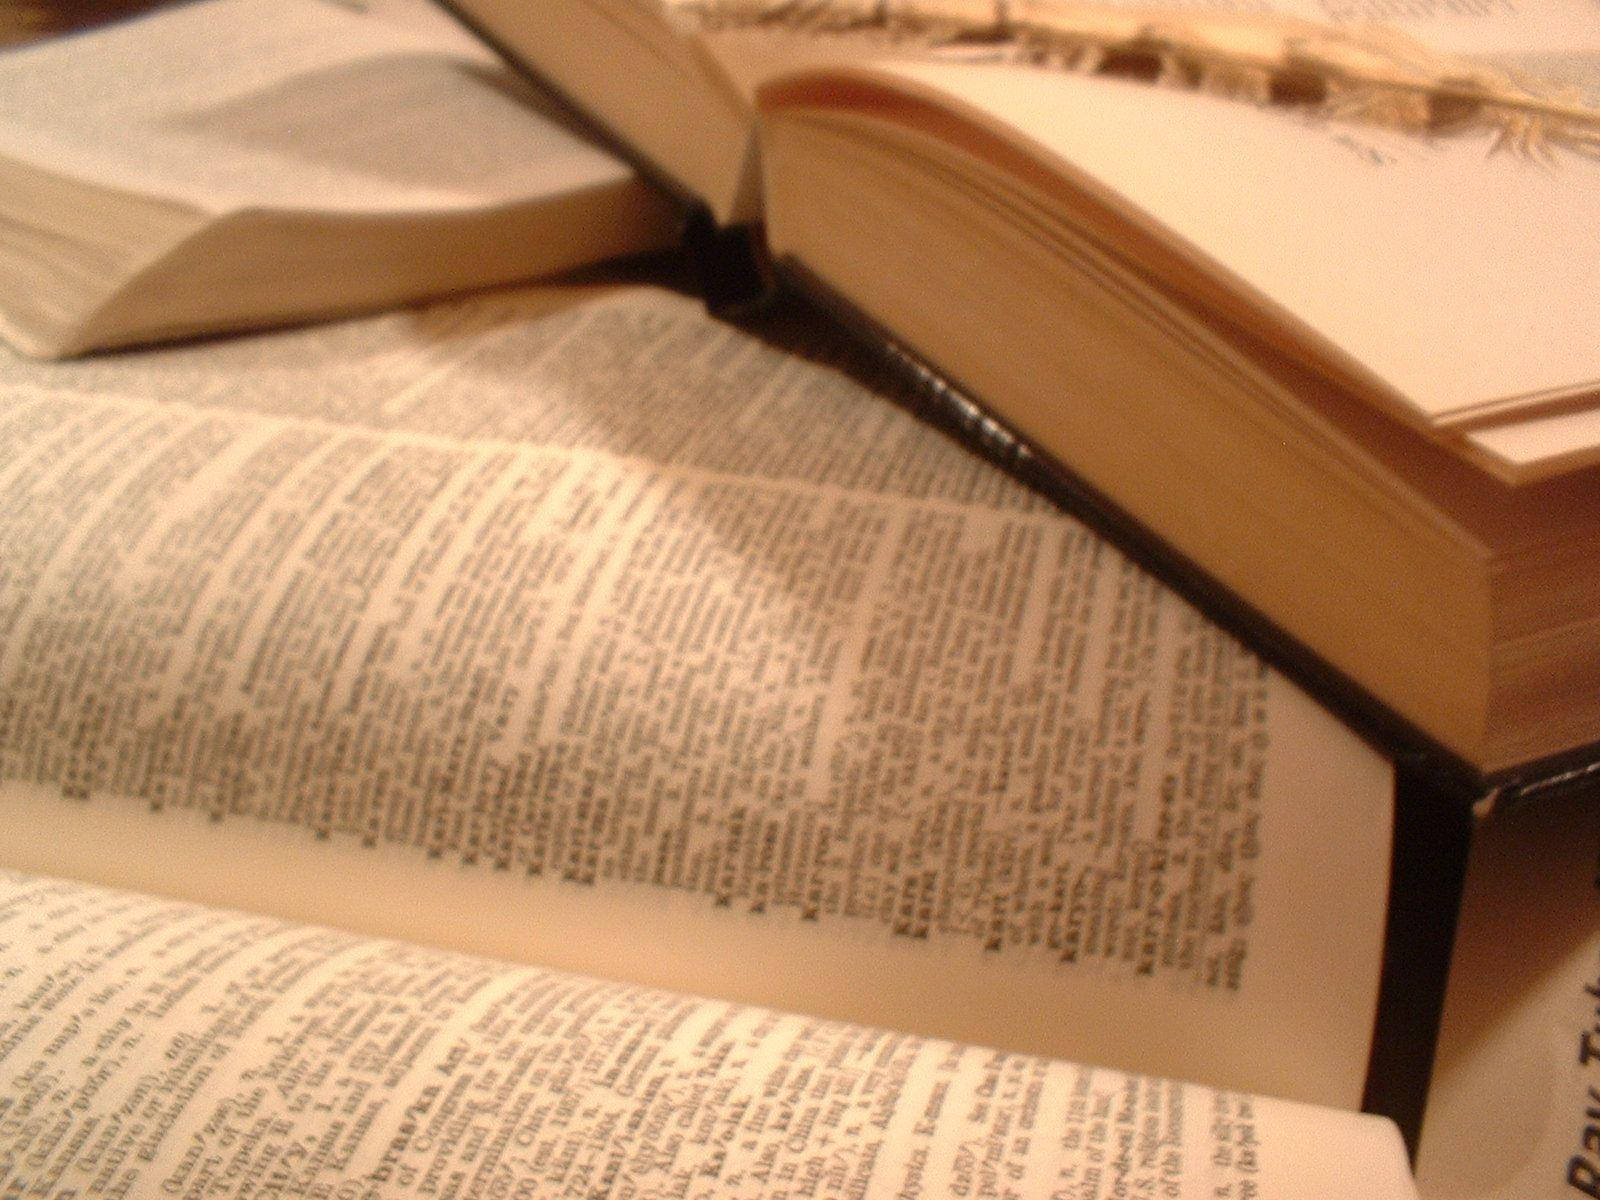 Opened Thick Dictionary Books Background